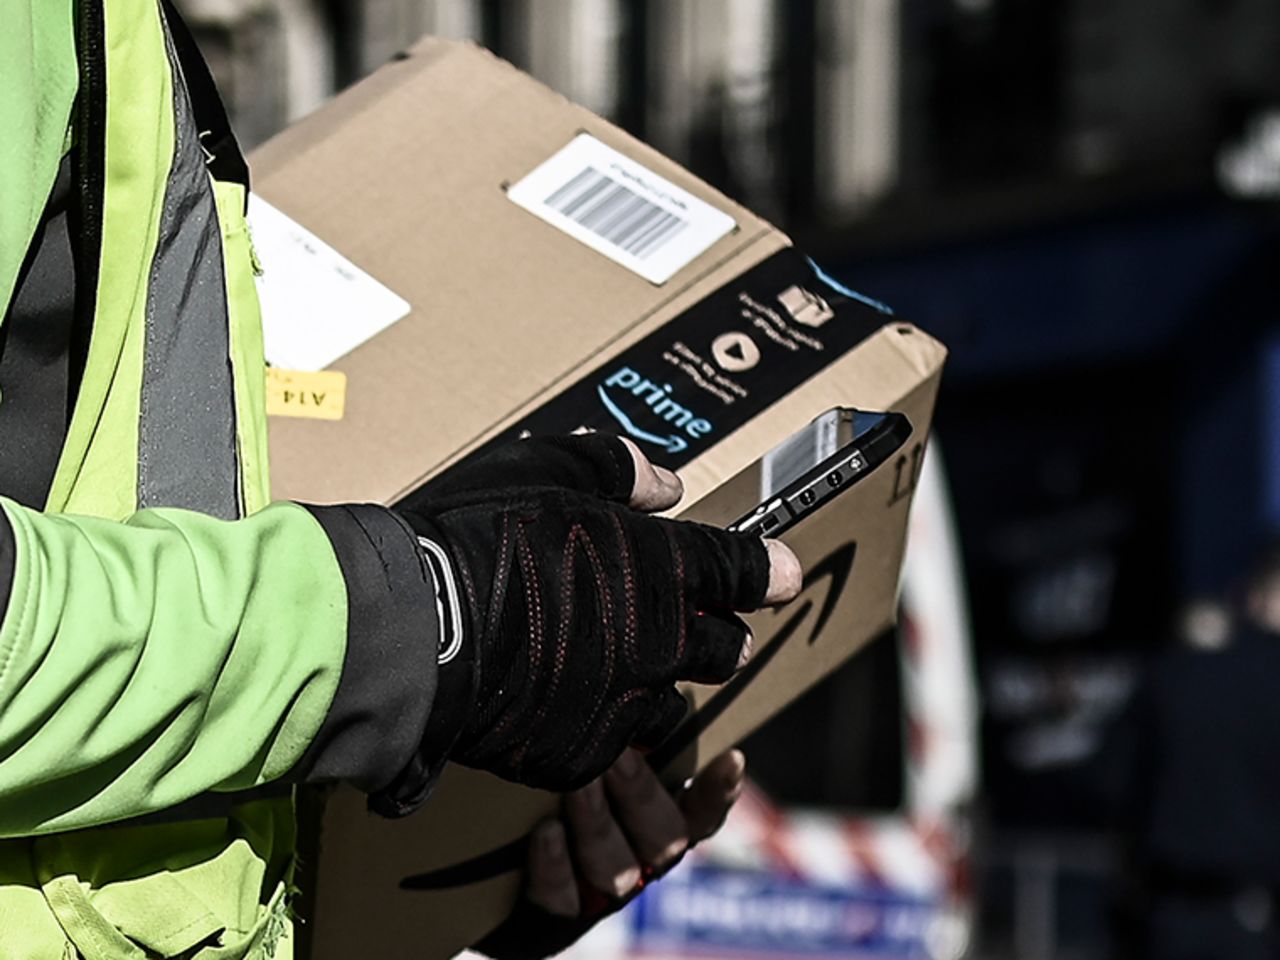 A delivery man delivers an Amazon package in Paris on March 19